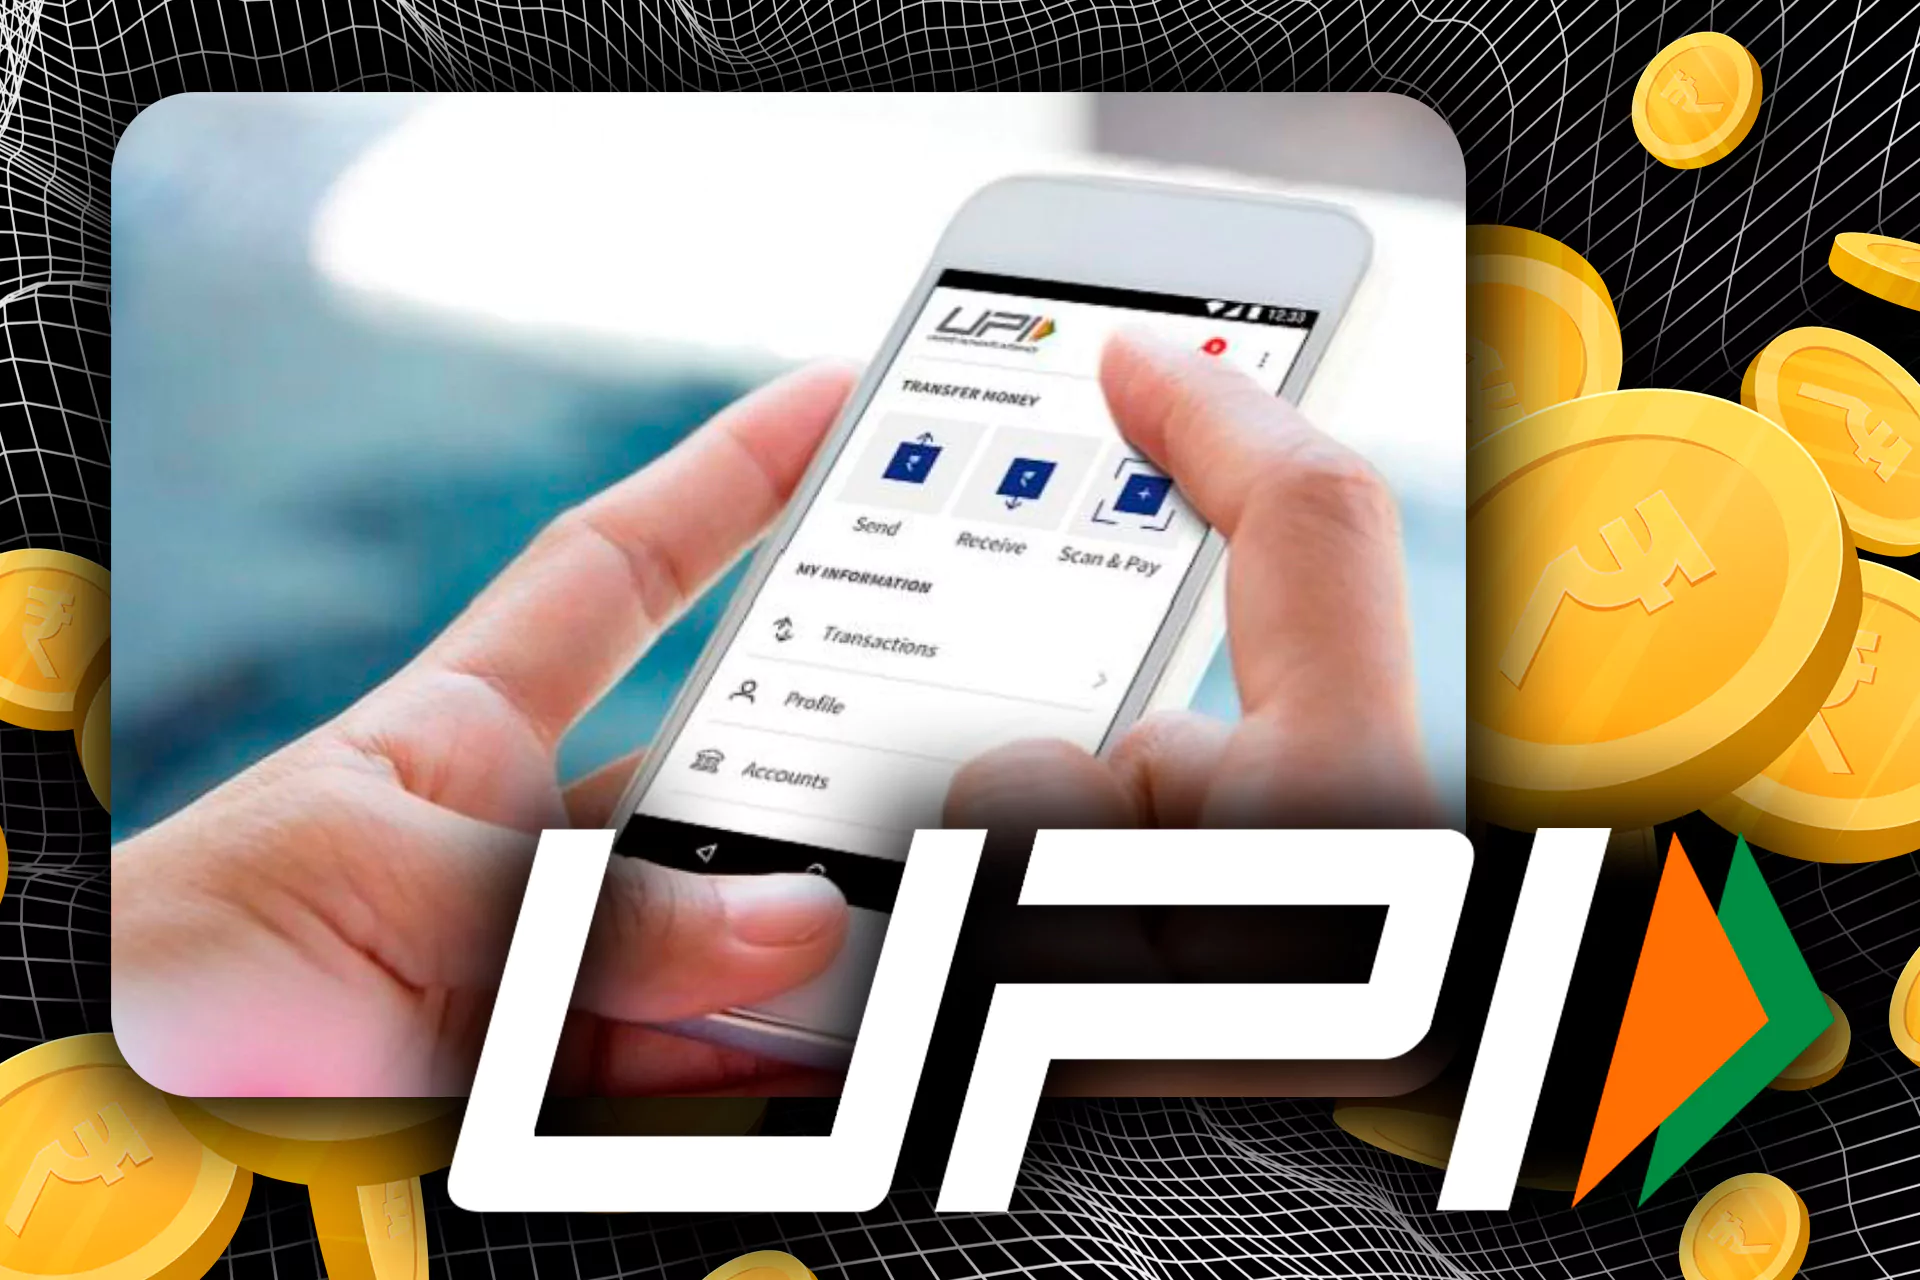 UPI is a system designed specifically for Indian users.